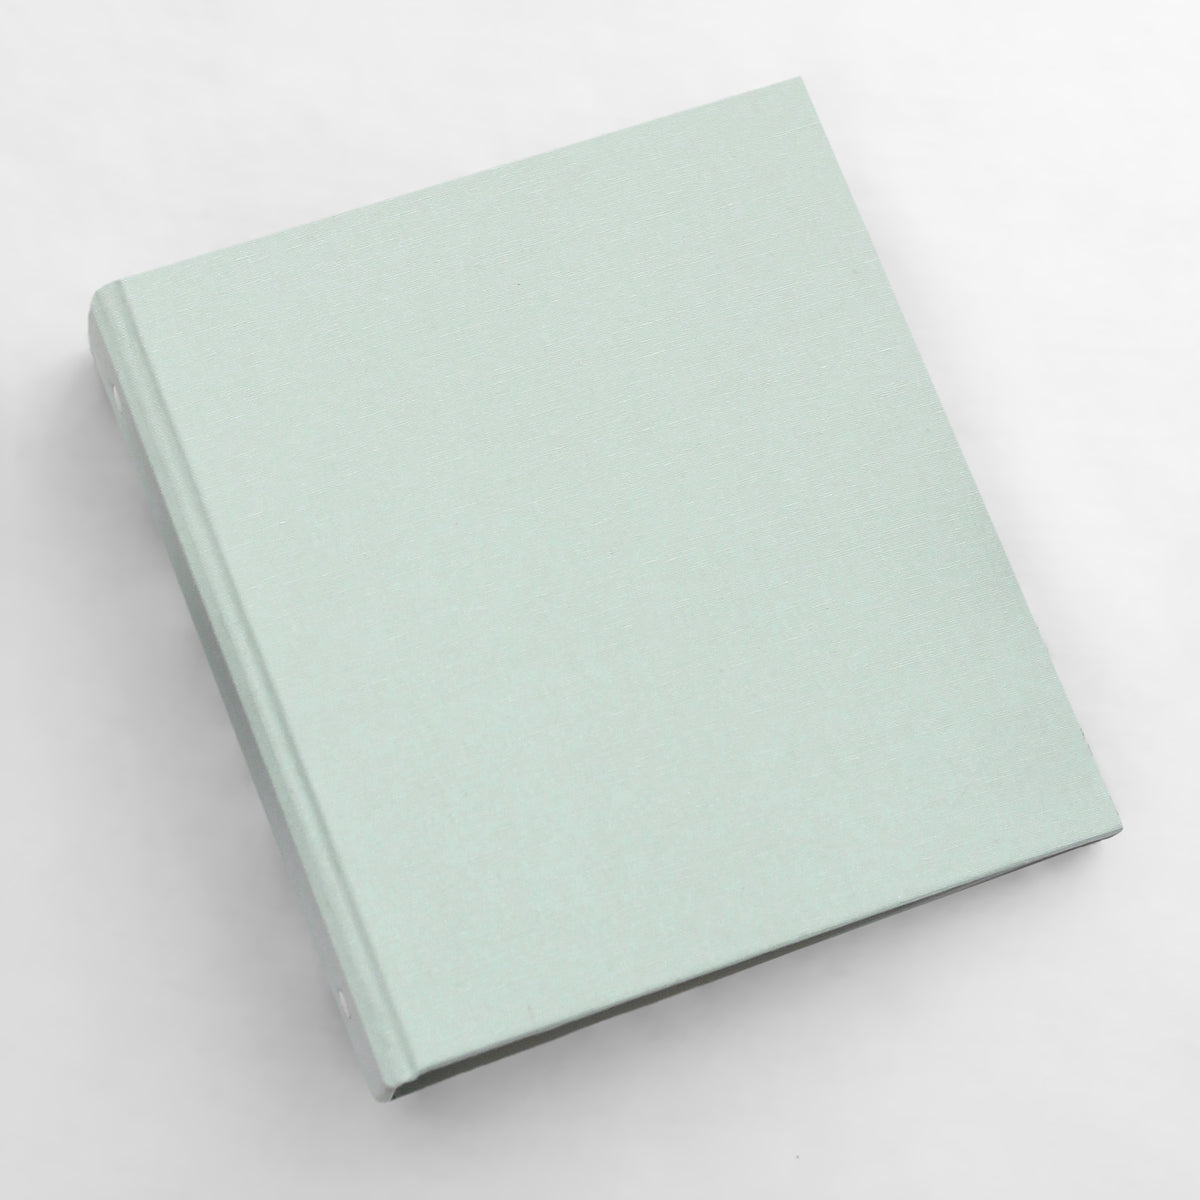 Large Photo Binder (for 4x6 photos) with Pastel Blue Cotton Cover